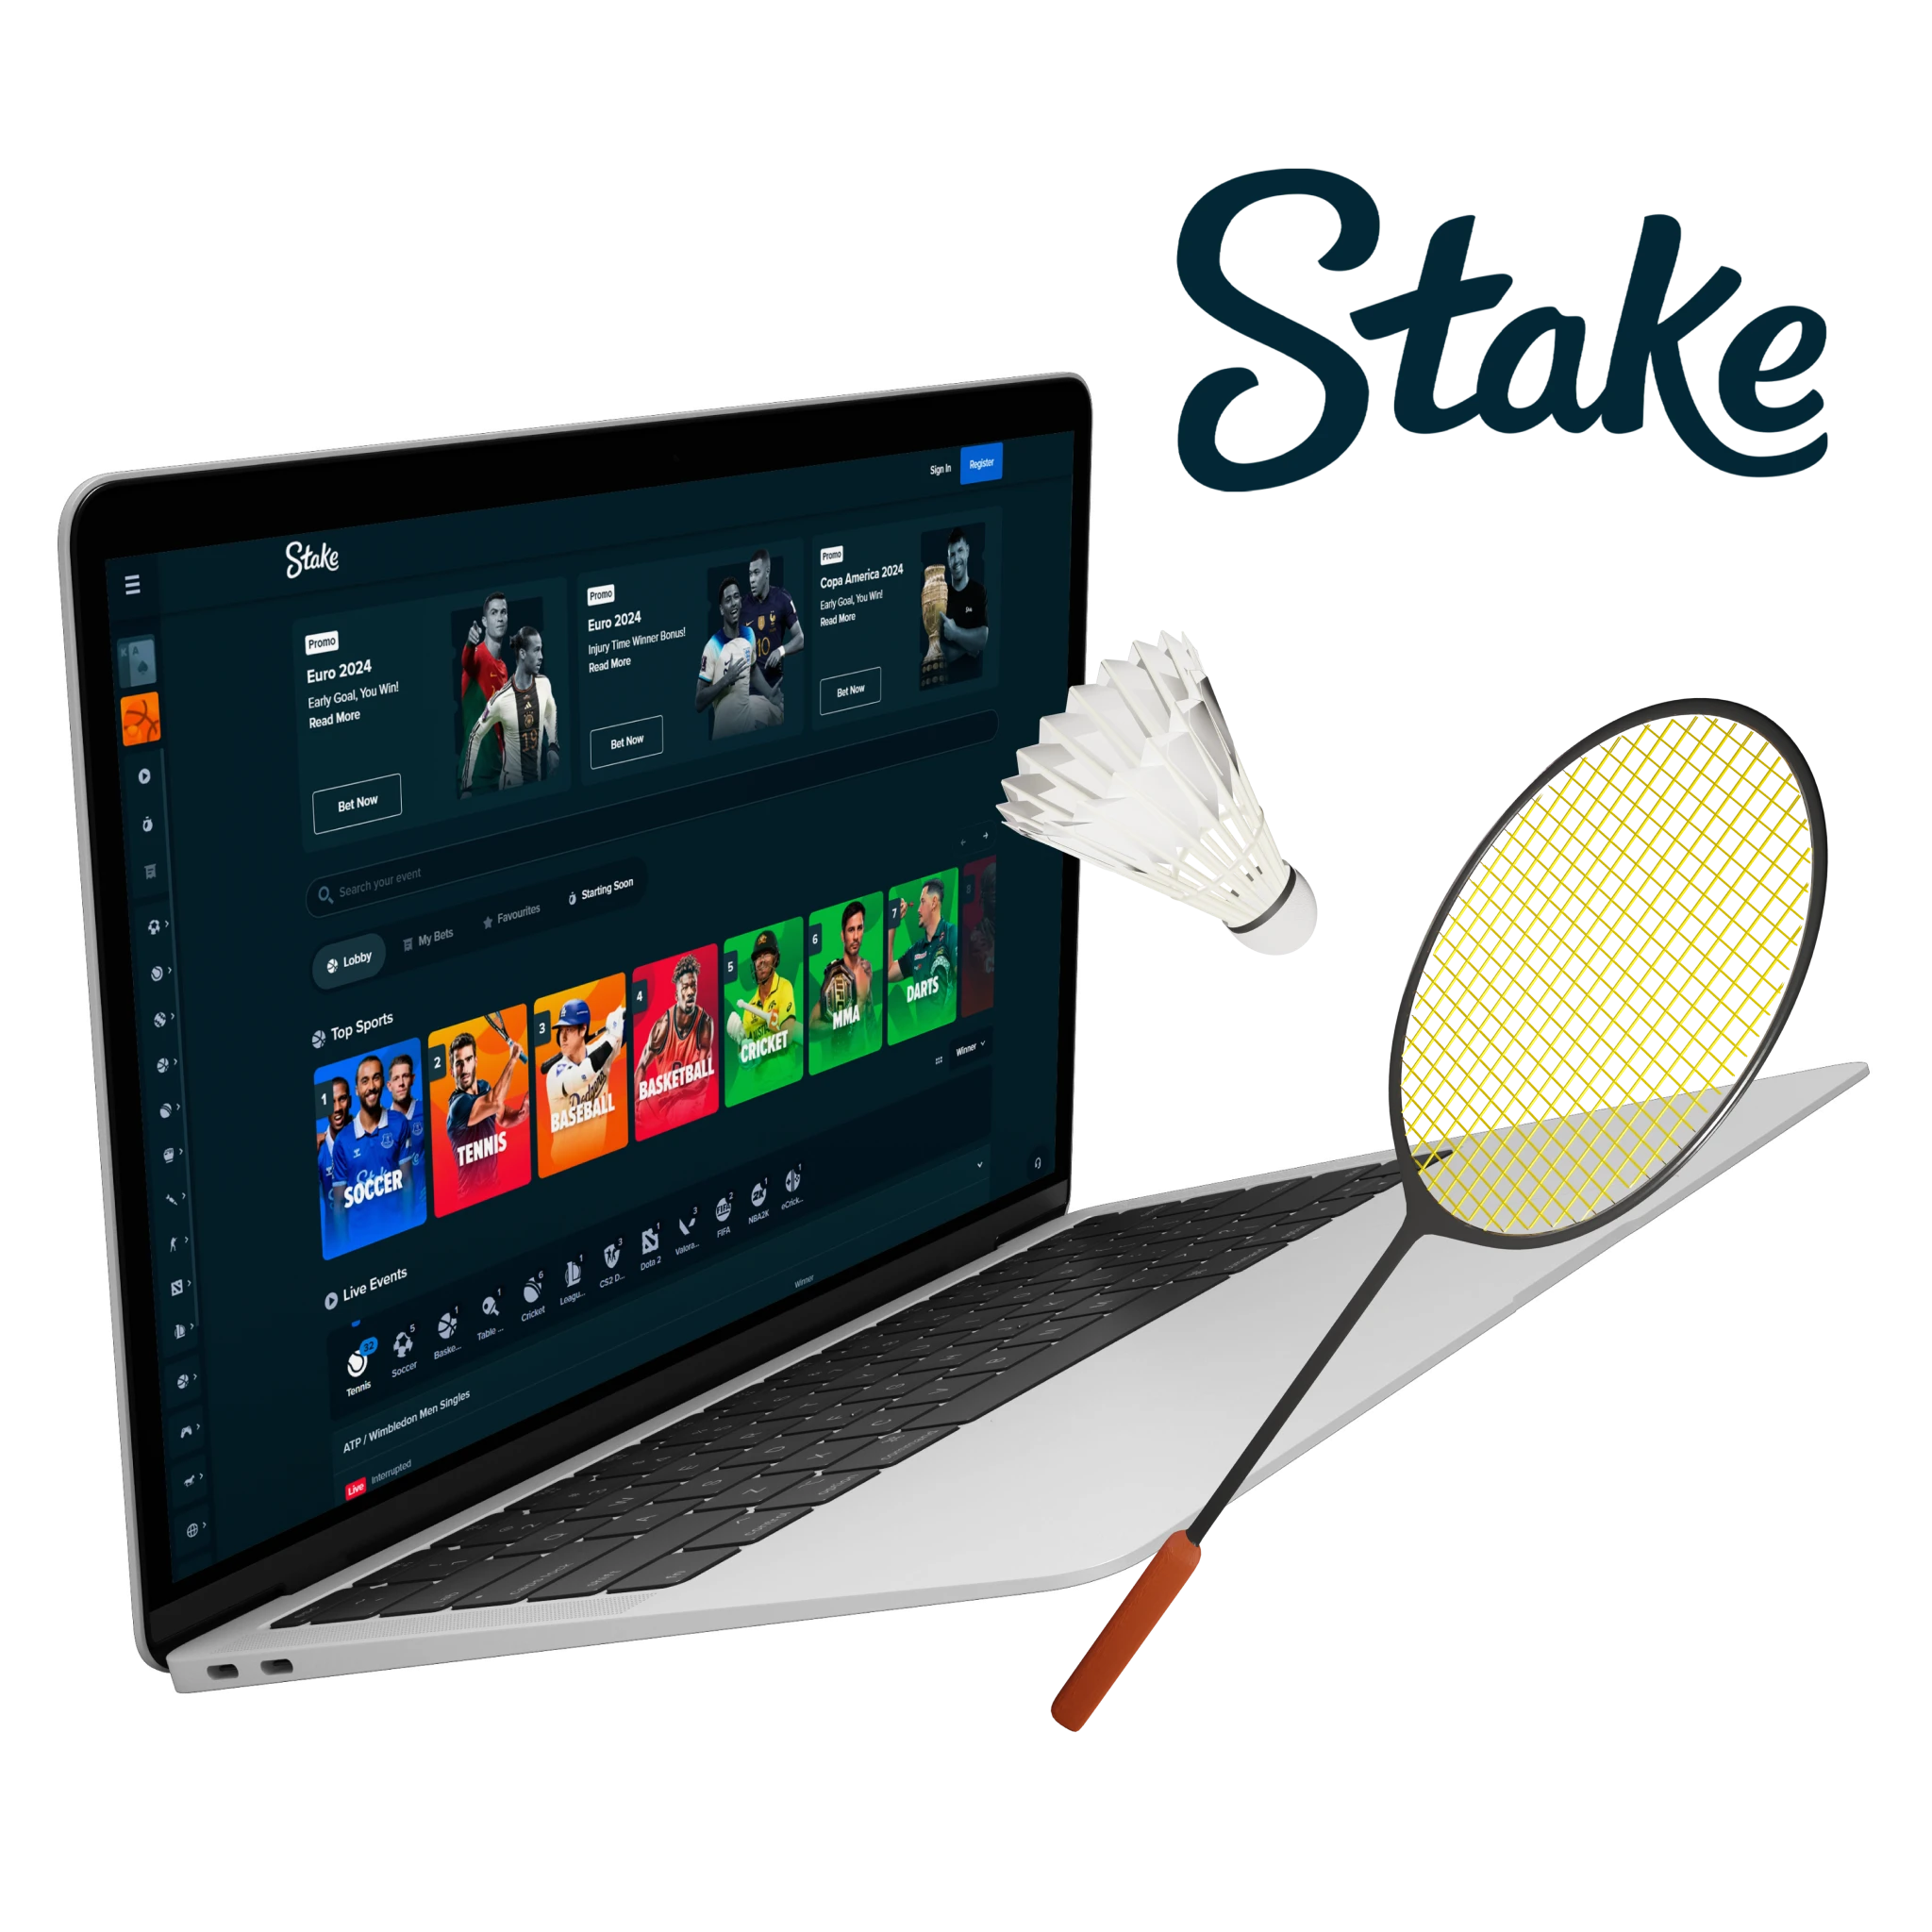 Stake is a safe place to bet on badminton, especially if you want great rewards and experience.